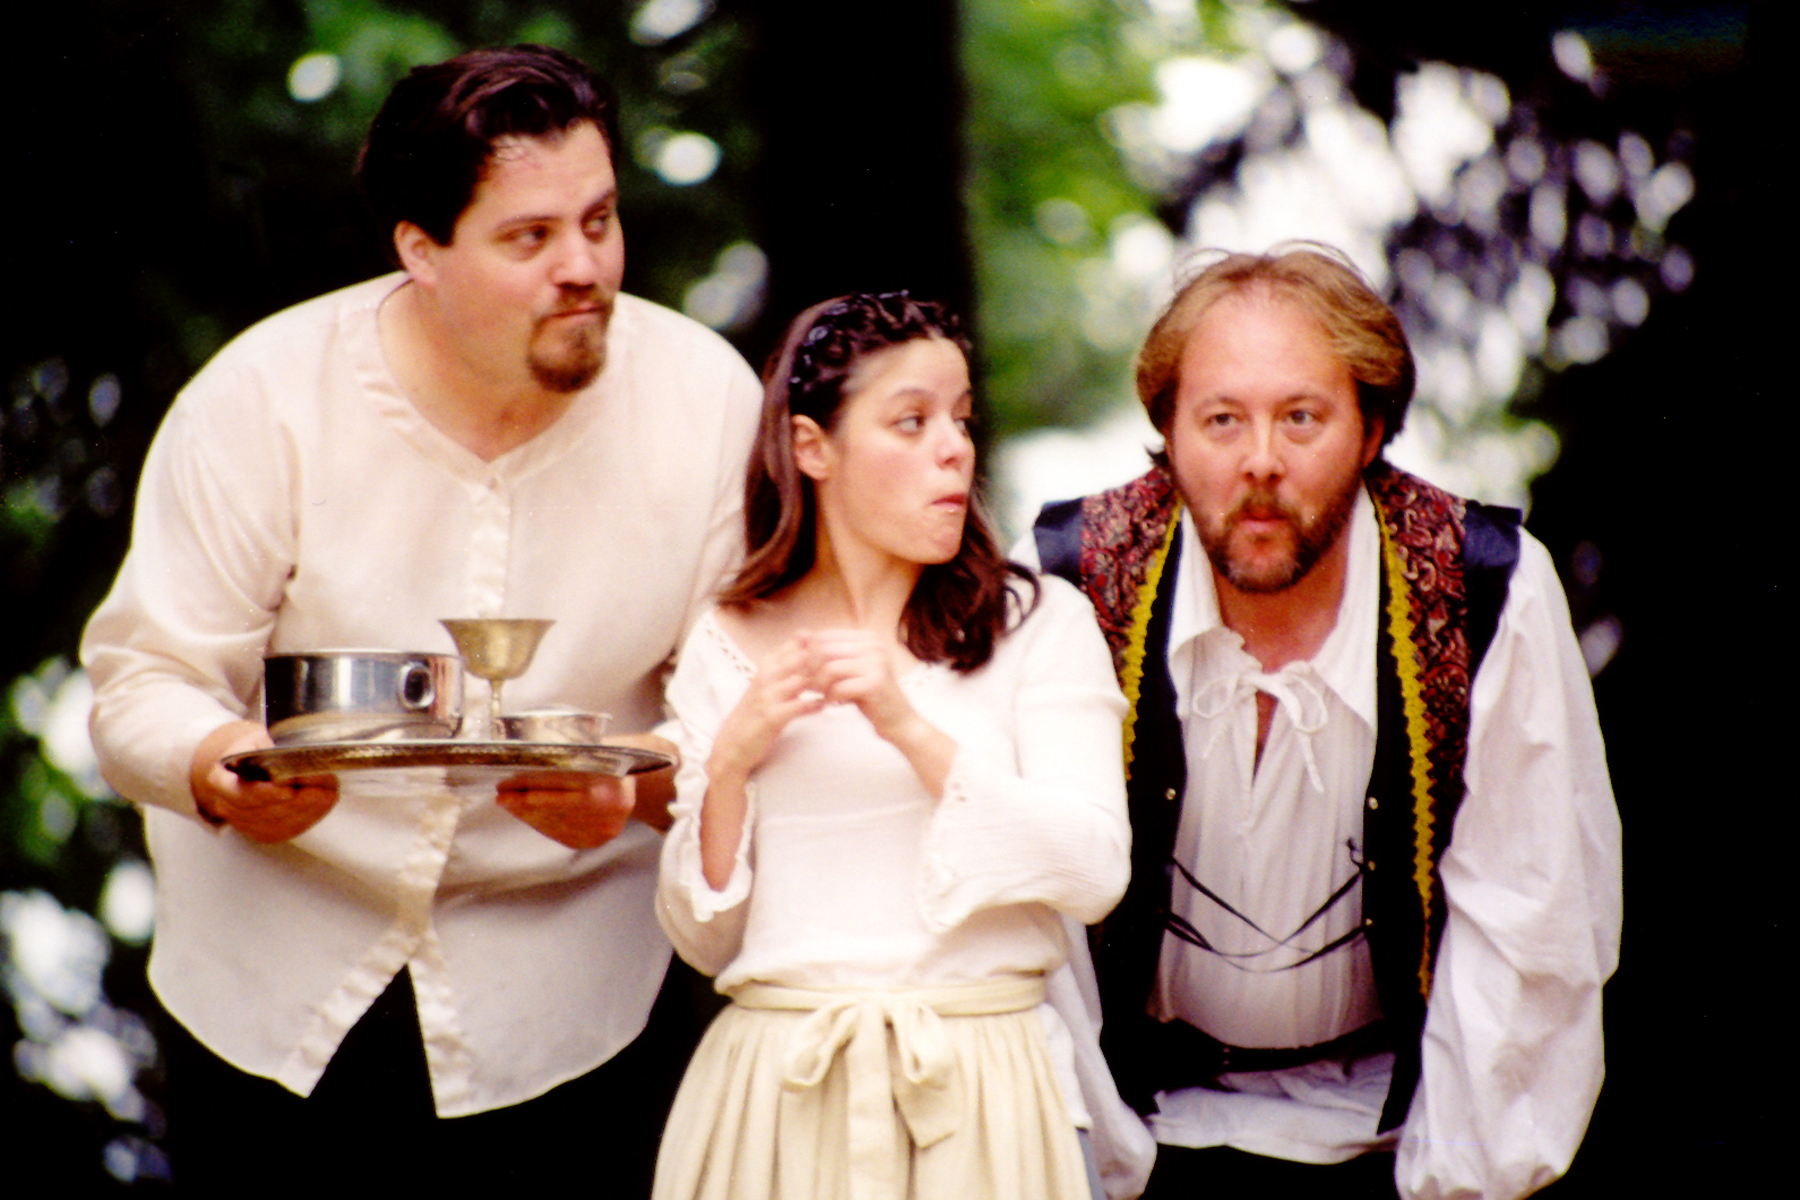 Peter Burford, Linda Lombardi, and Ken Holmes in The Taming of the Shrew